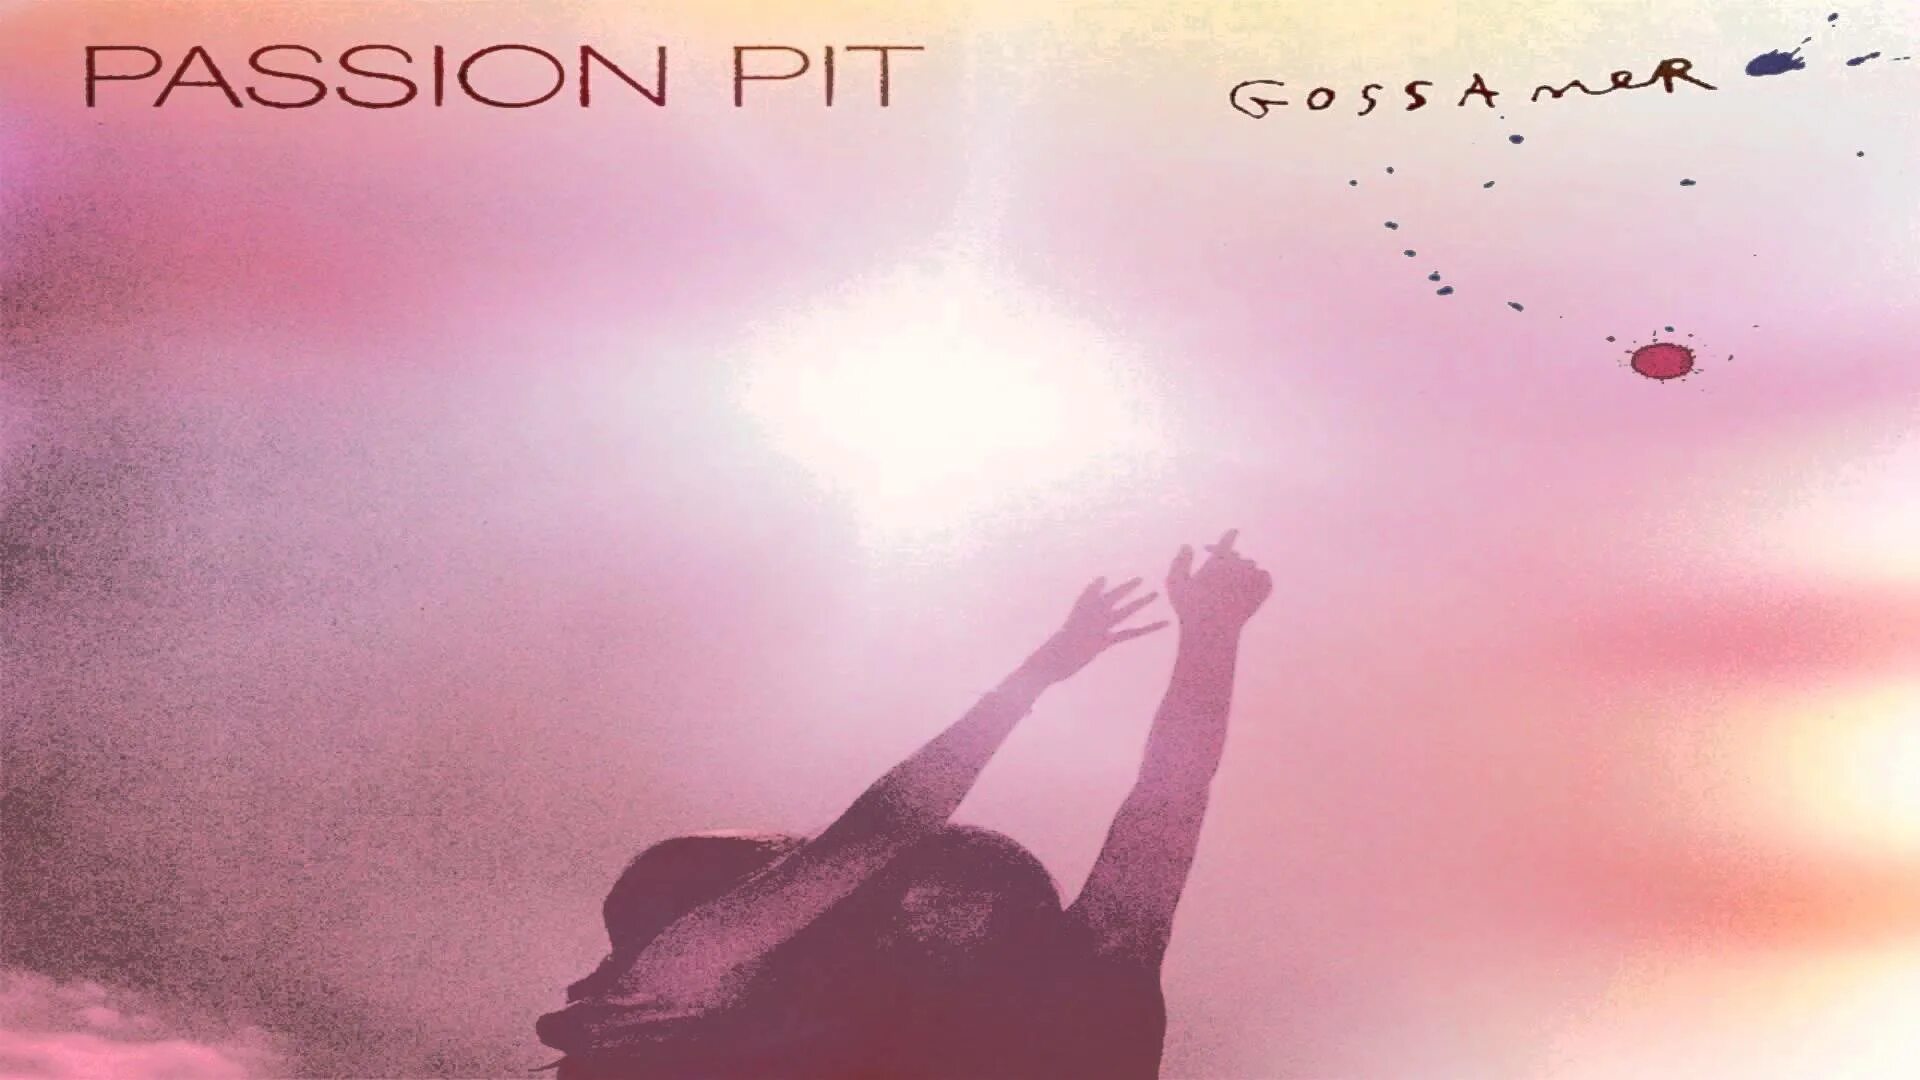 Carried away passion Pit. Gossamer певец. Мем passion Pit - carried away.